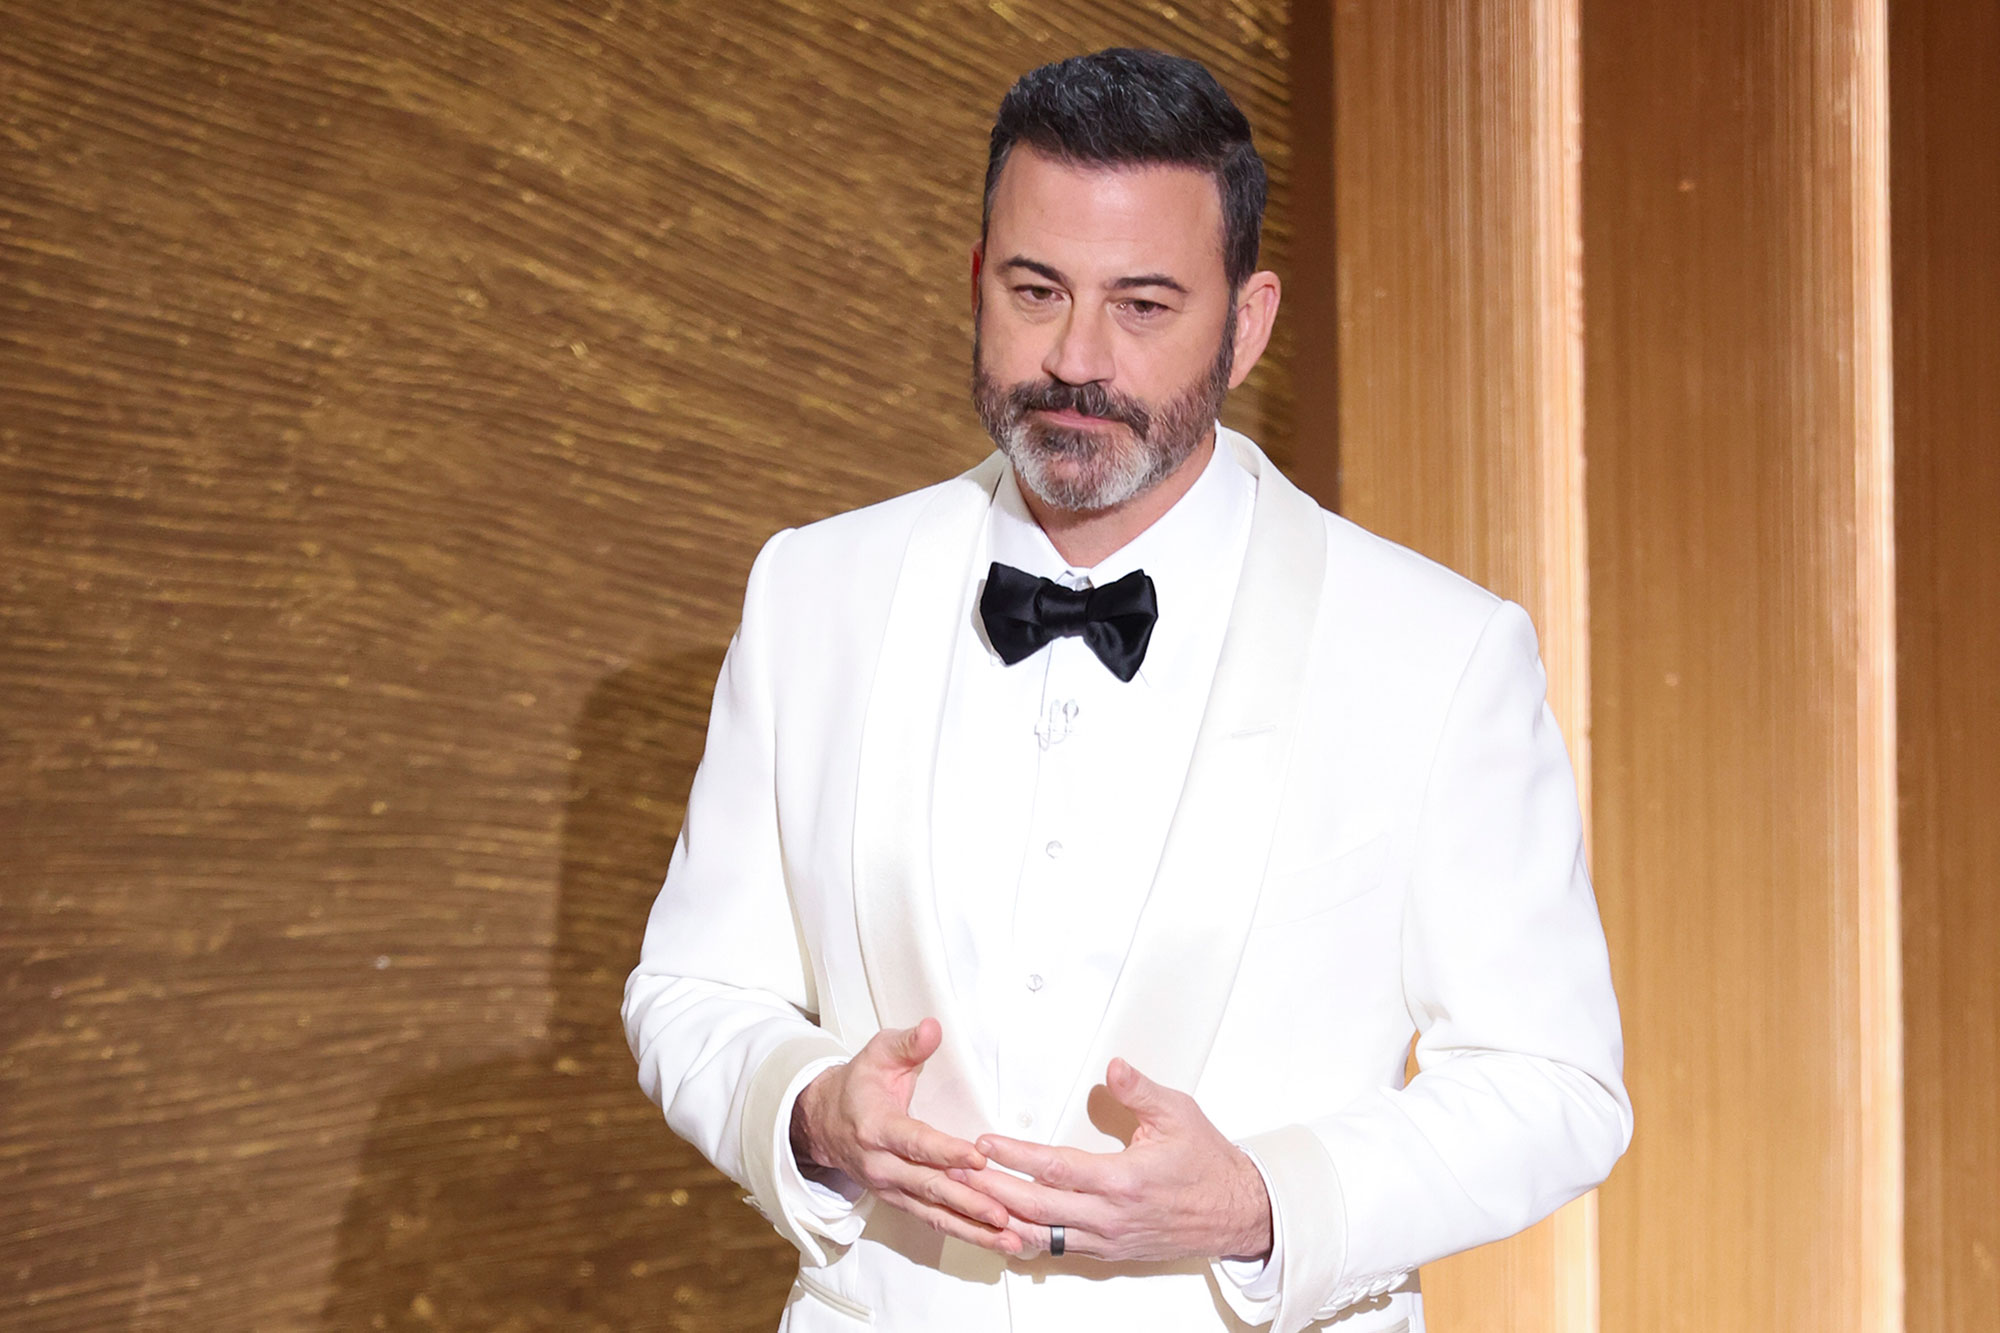 Jimmy Kimmel at the 95th Annual Academy Awards held at Dolby Theatre on March 12, 2023 in Los Angeles, California.